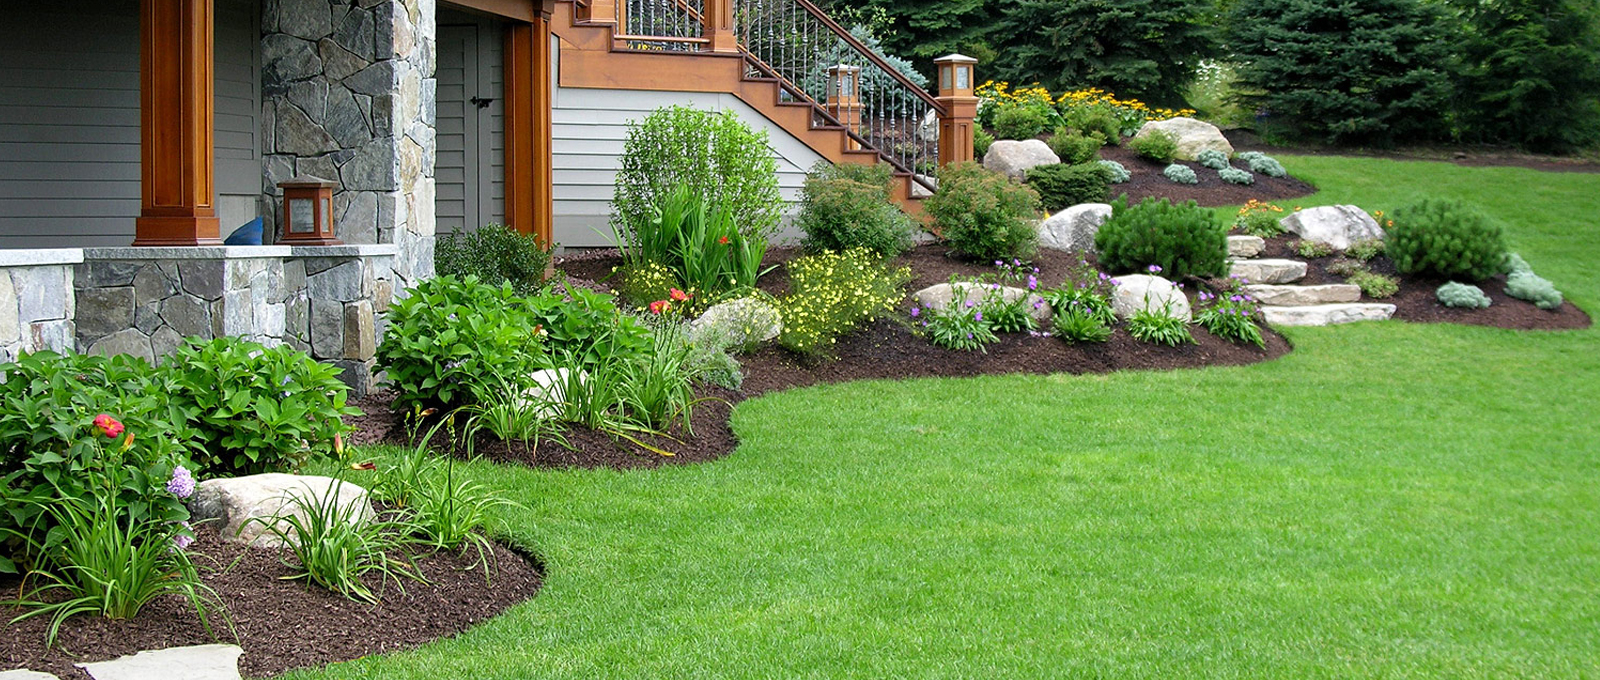 A masterful approach to commercial and<br> residential landscaping.